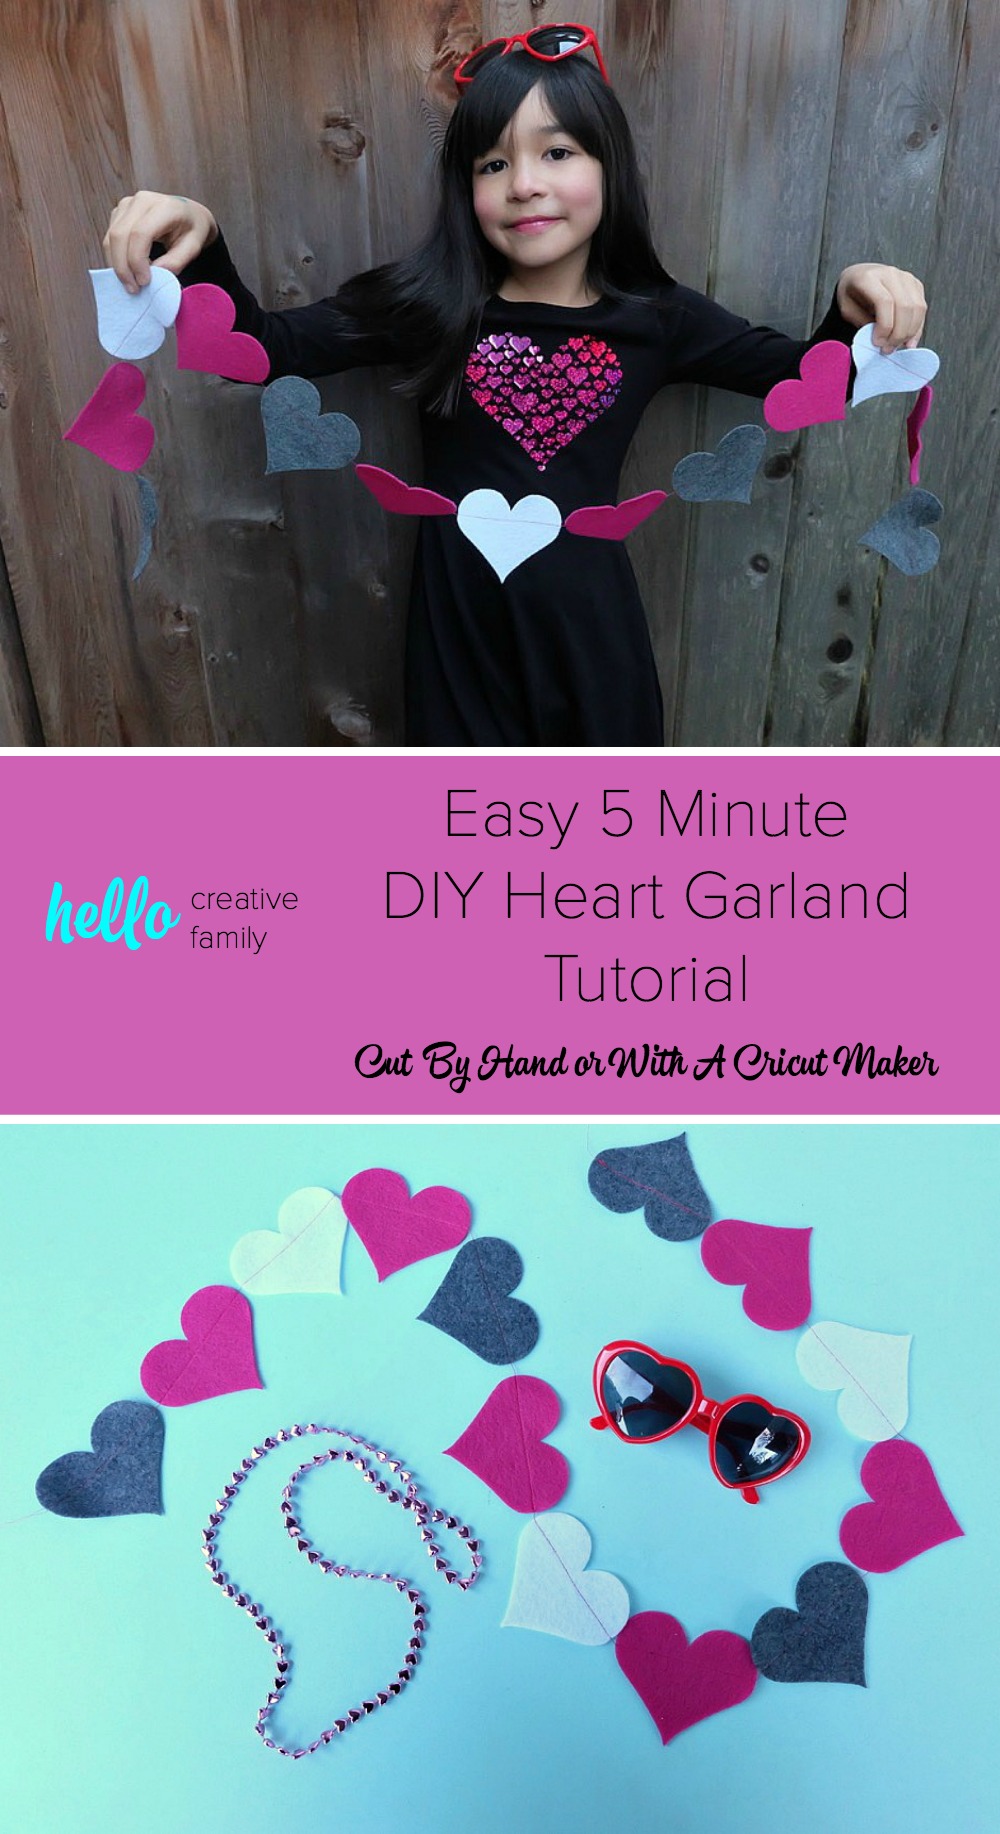 Decorate for Valentine's Day with this easy 5 minute Felt DIY Heart Garland! Customize this project with different colors of felt. So cute not only for decorating the home but also to decorate a classroom or to use as a photo prop! Cut your hearts by hand or with a Cricut Maker. A great first sewing project for kids! #Cricut #craft #ValentinesDay